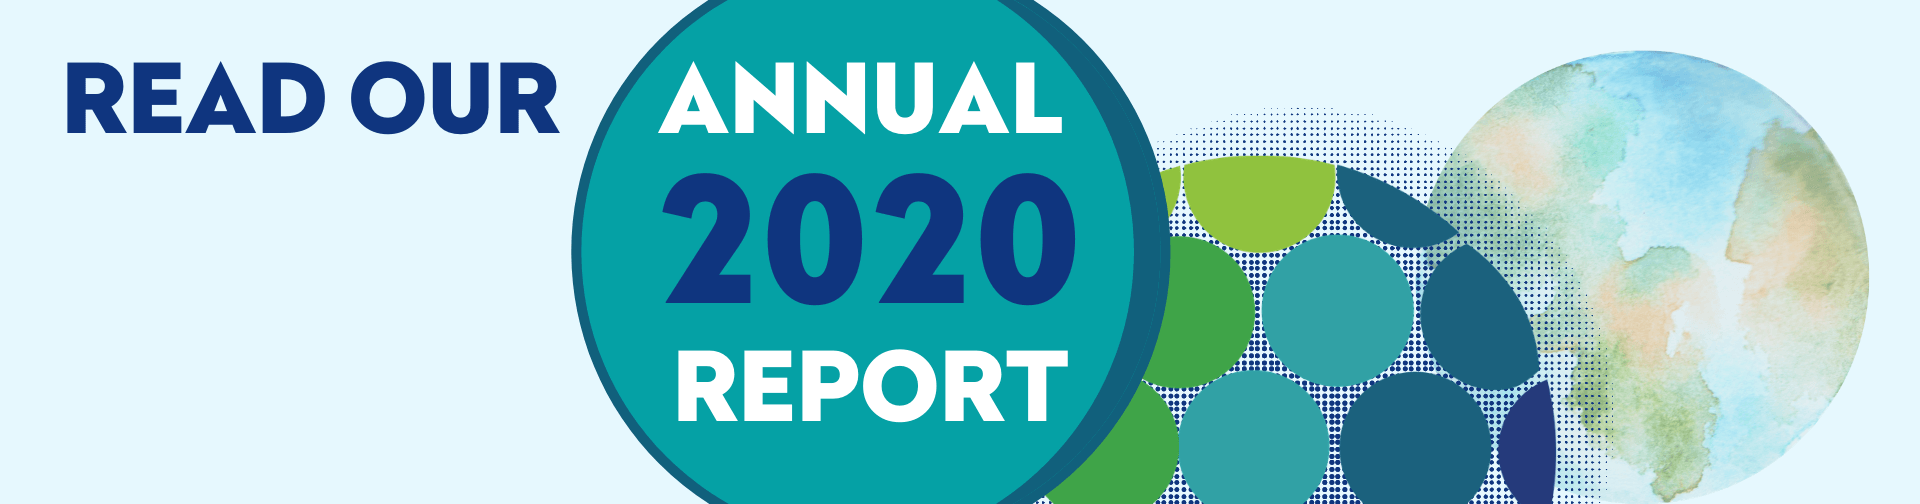 2020 Annual Report Website Banner